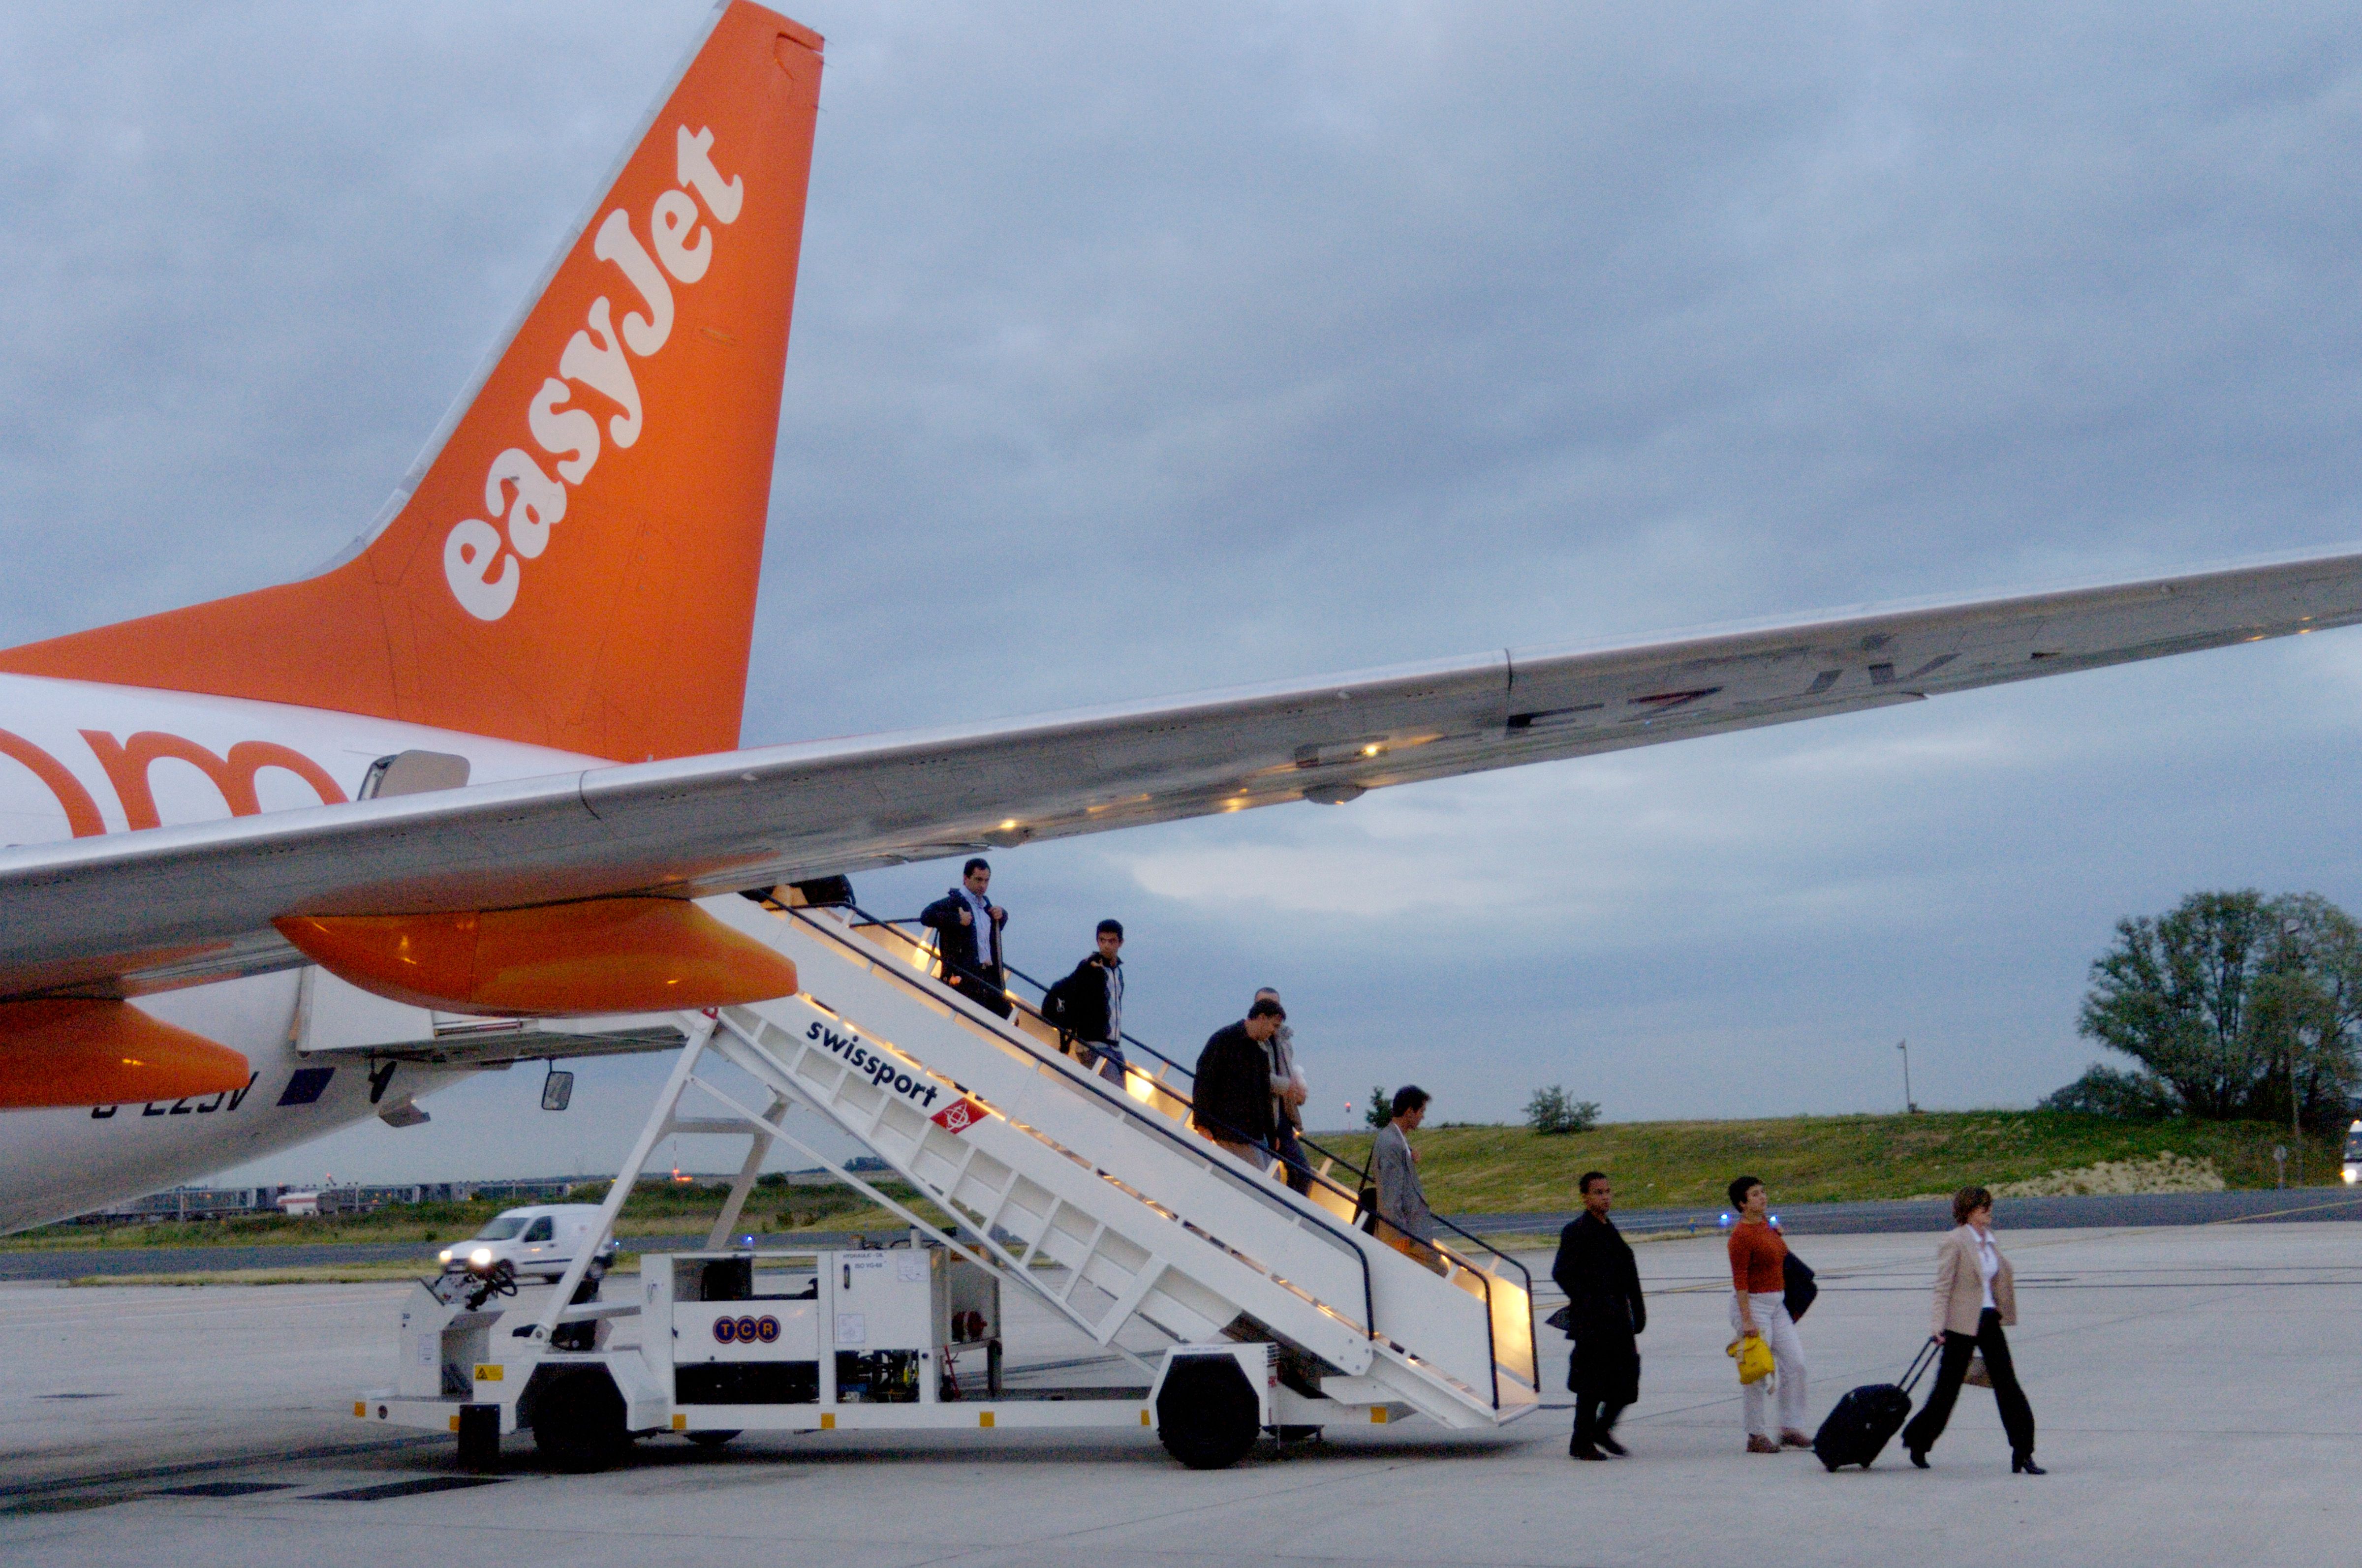 Passengers disembark from an easyJet via staircase from the aircraft's rear door